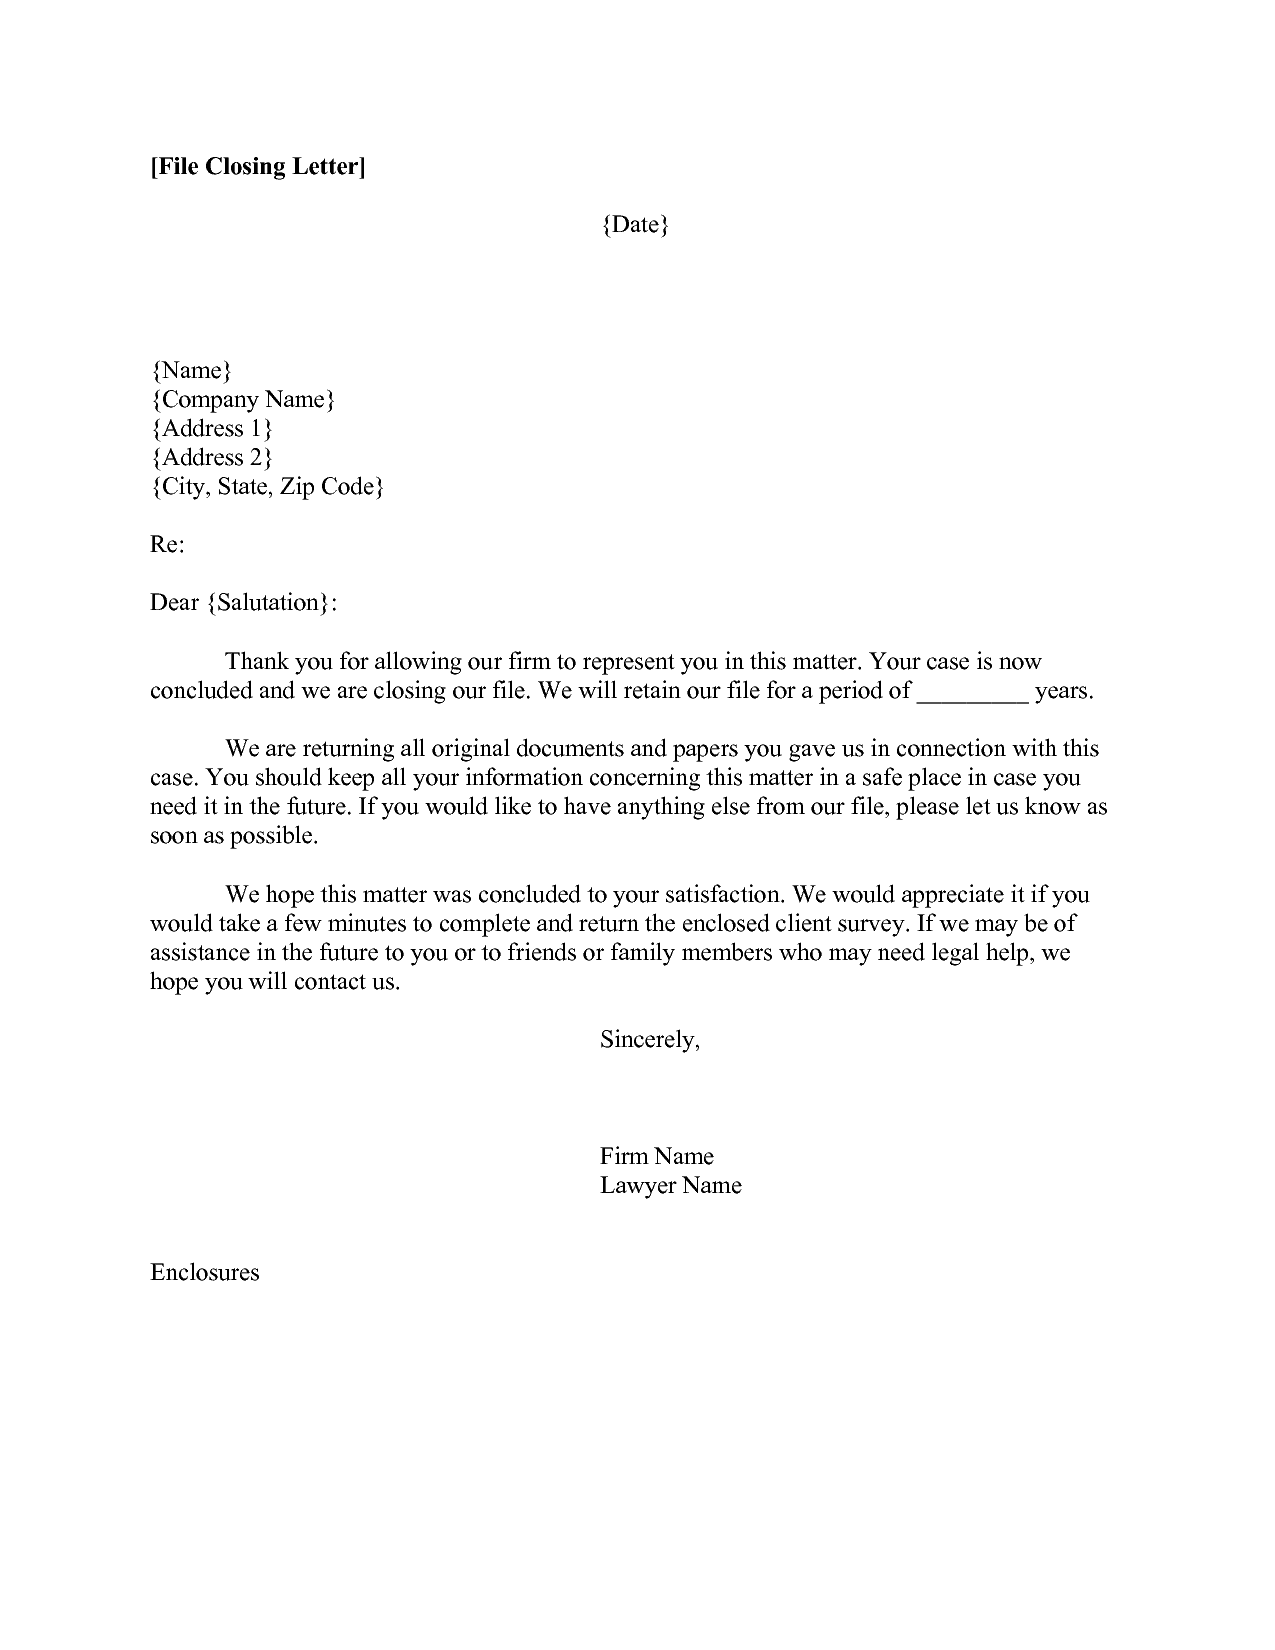 Business Letter Closings | Crna Cover Letter